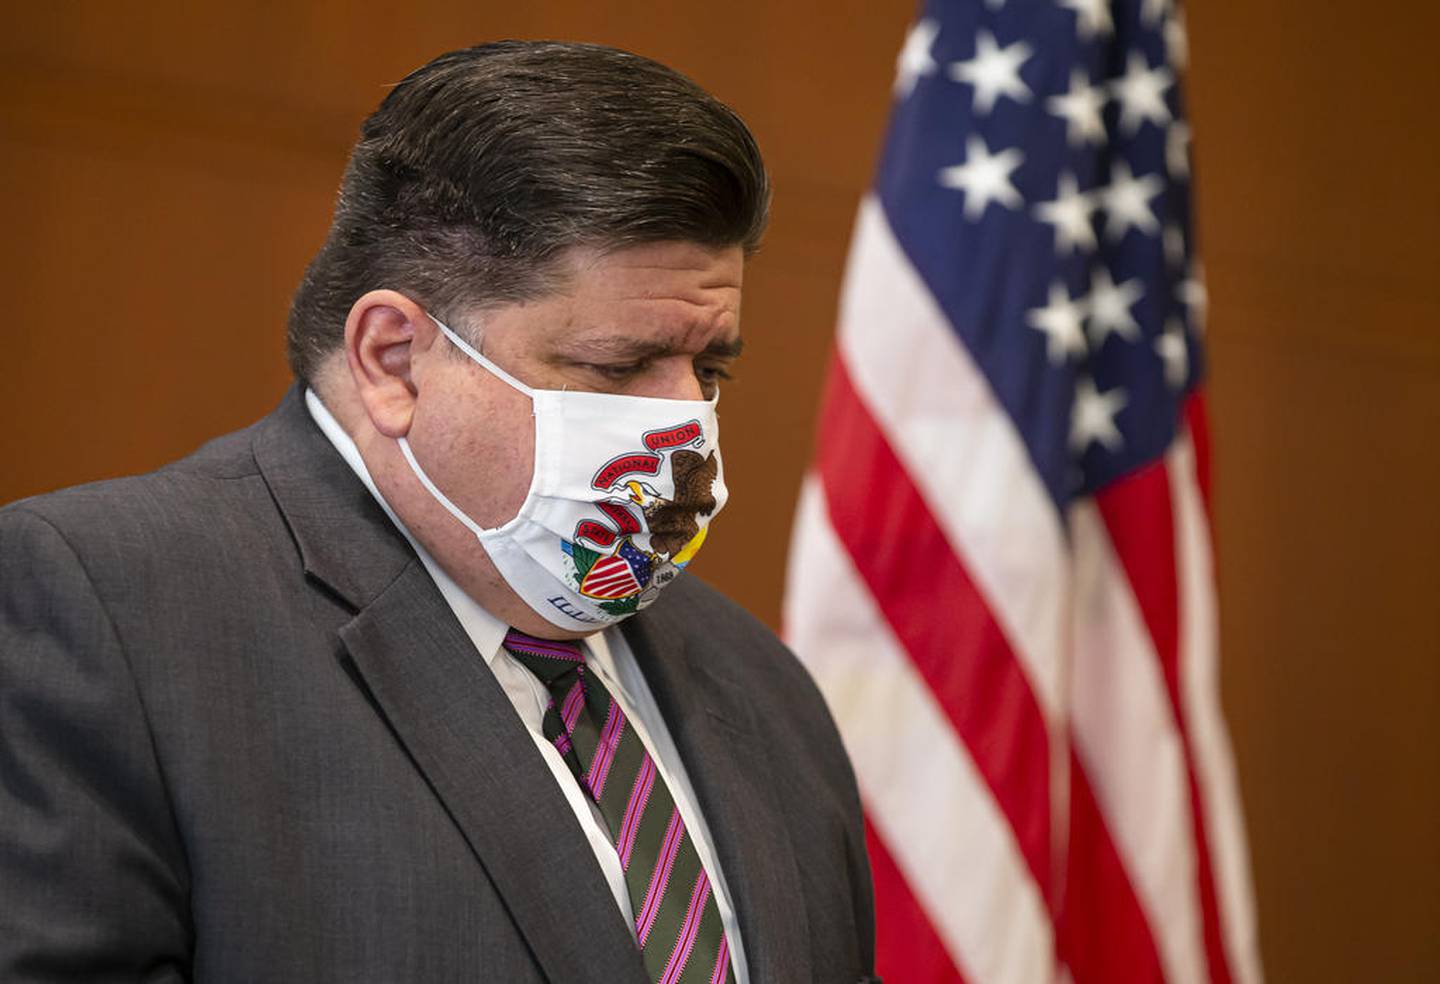 Gov. JB Pritzker appears at a news conference Sept. 21 in Springfield.